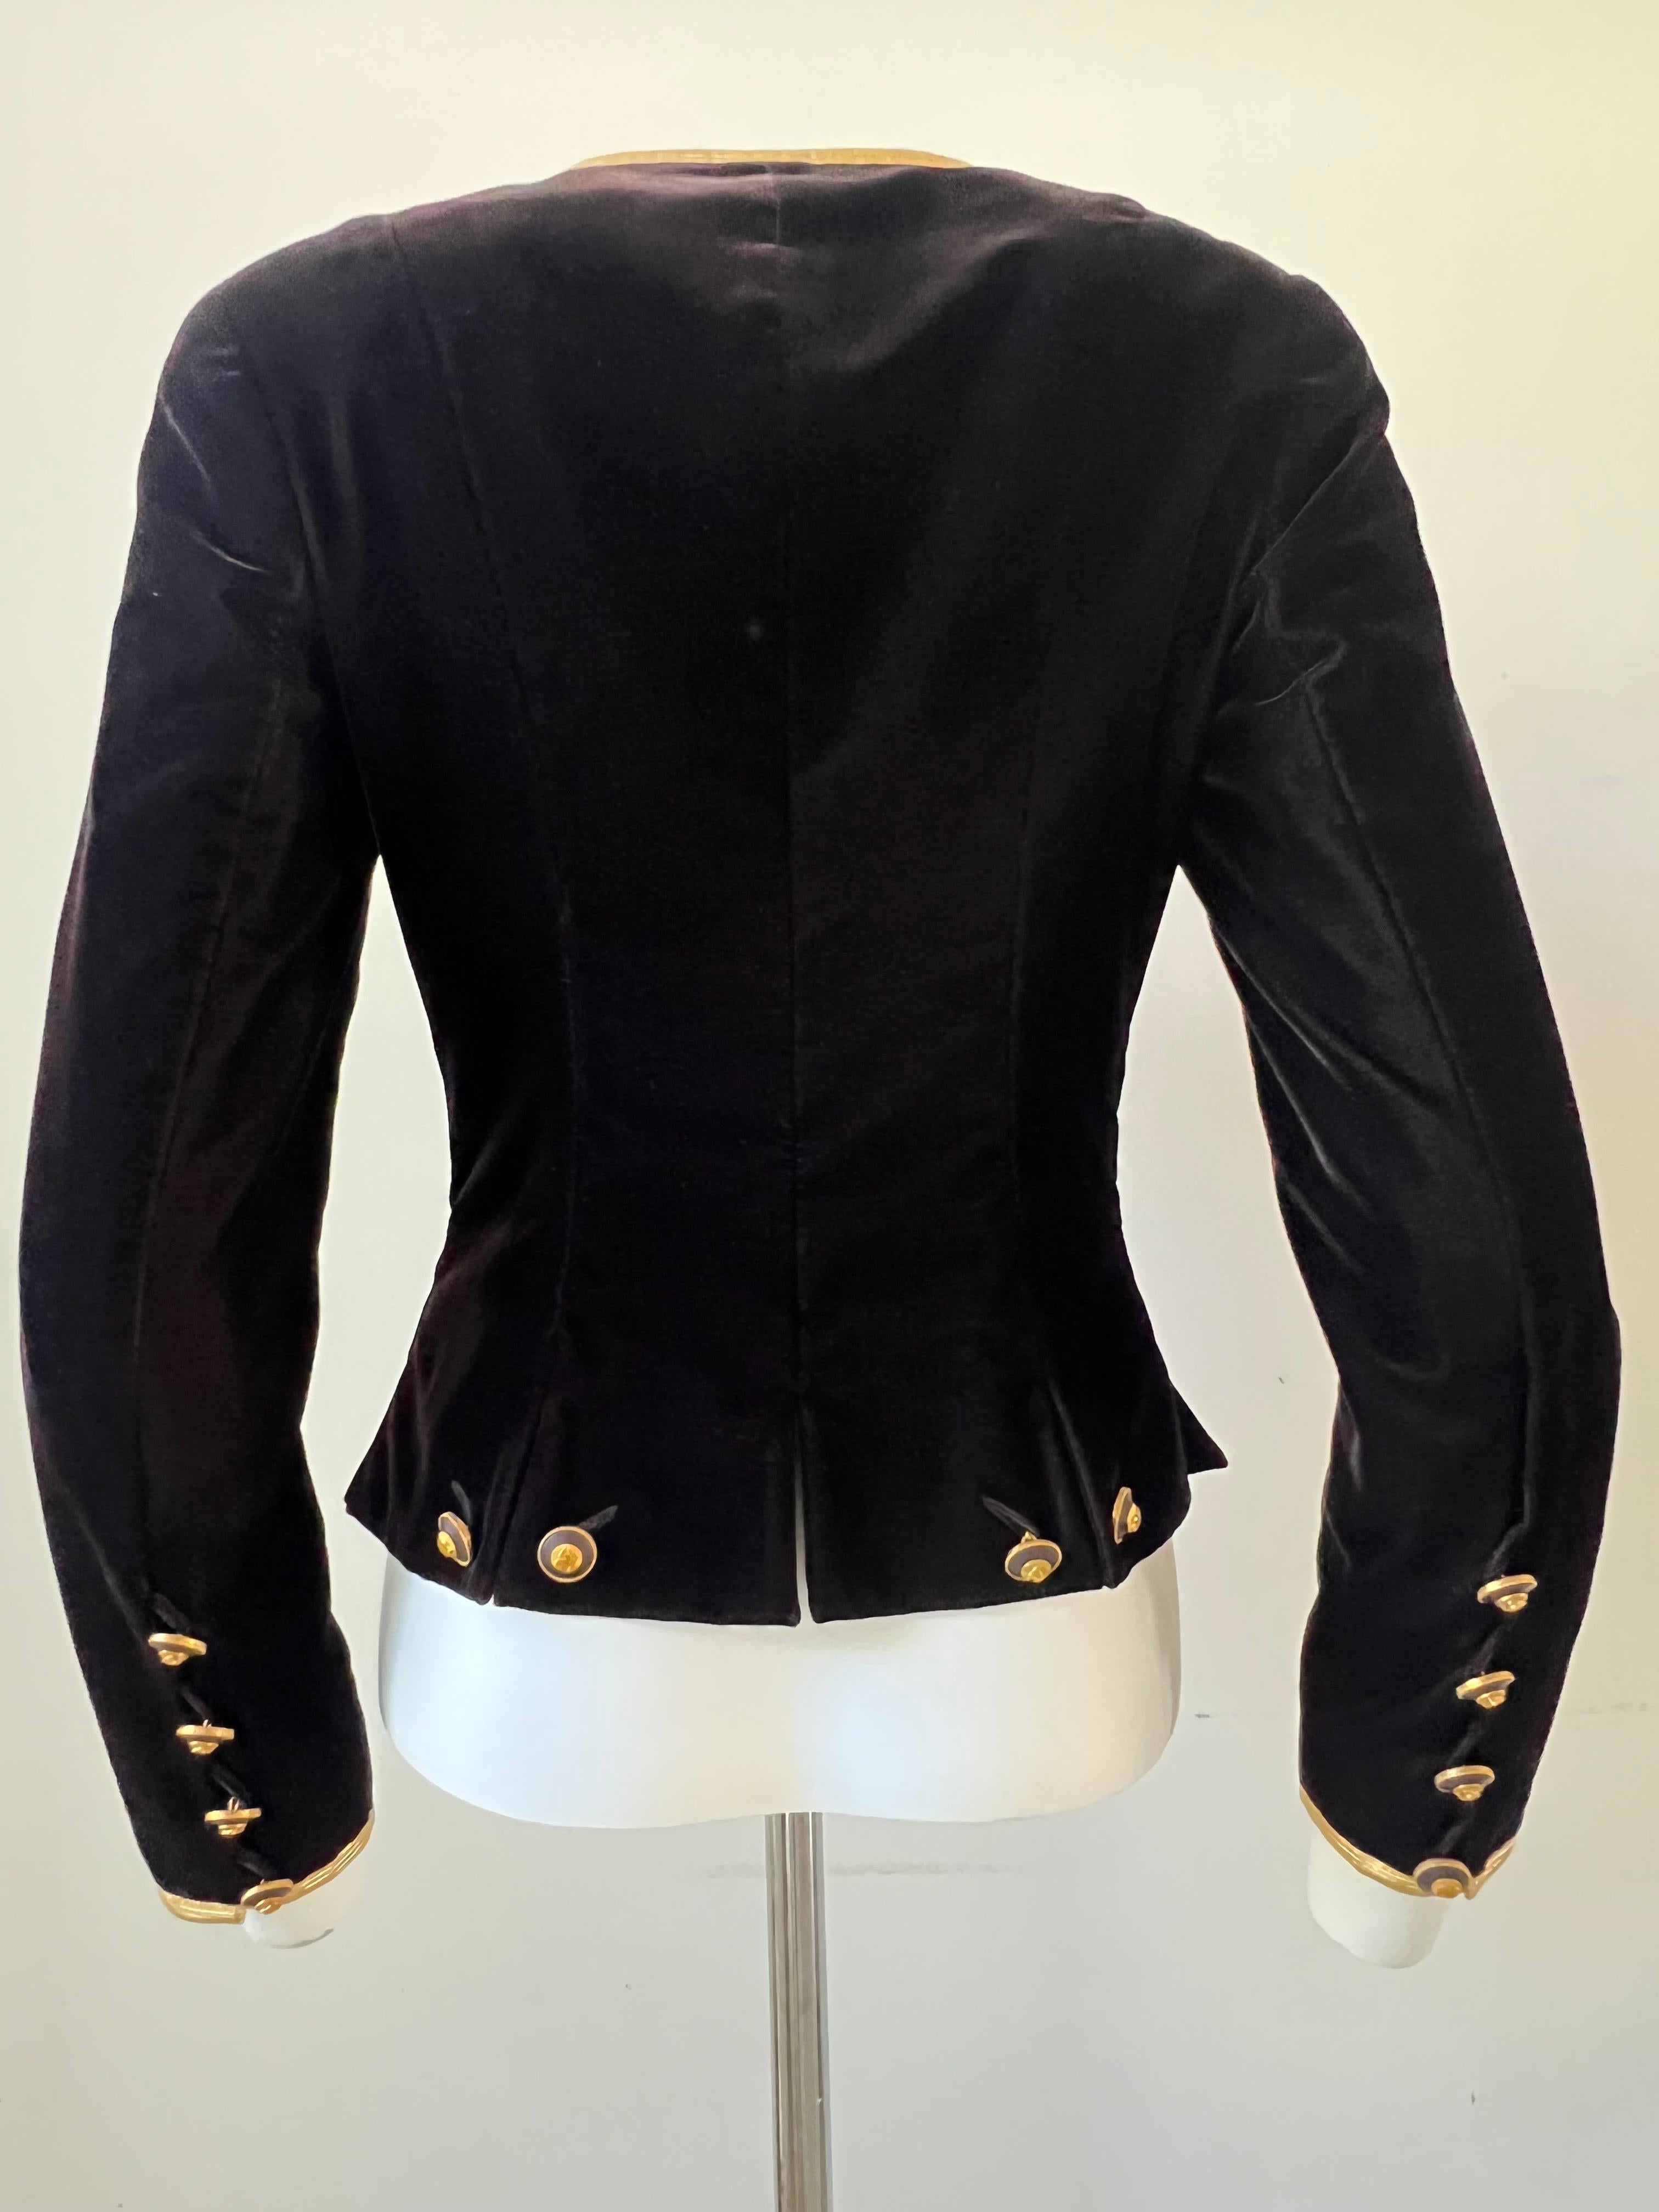 Extraordianary jacket in brown velvet, golden pasementerie at the collar and at the ends of the sleeves. Five gold and brown buttons with the chanel logo on the front of the jacket, four on the back of each sleeve. The particularity of this superb